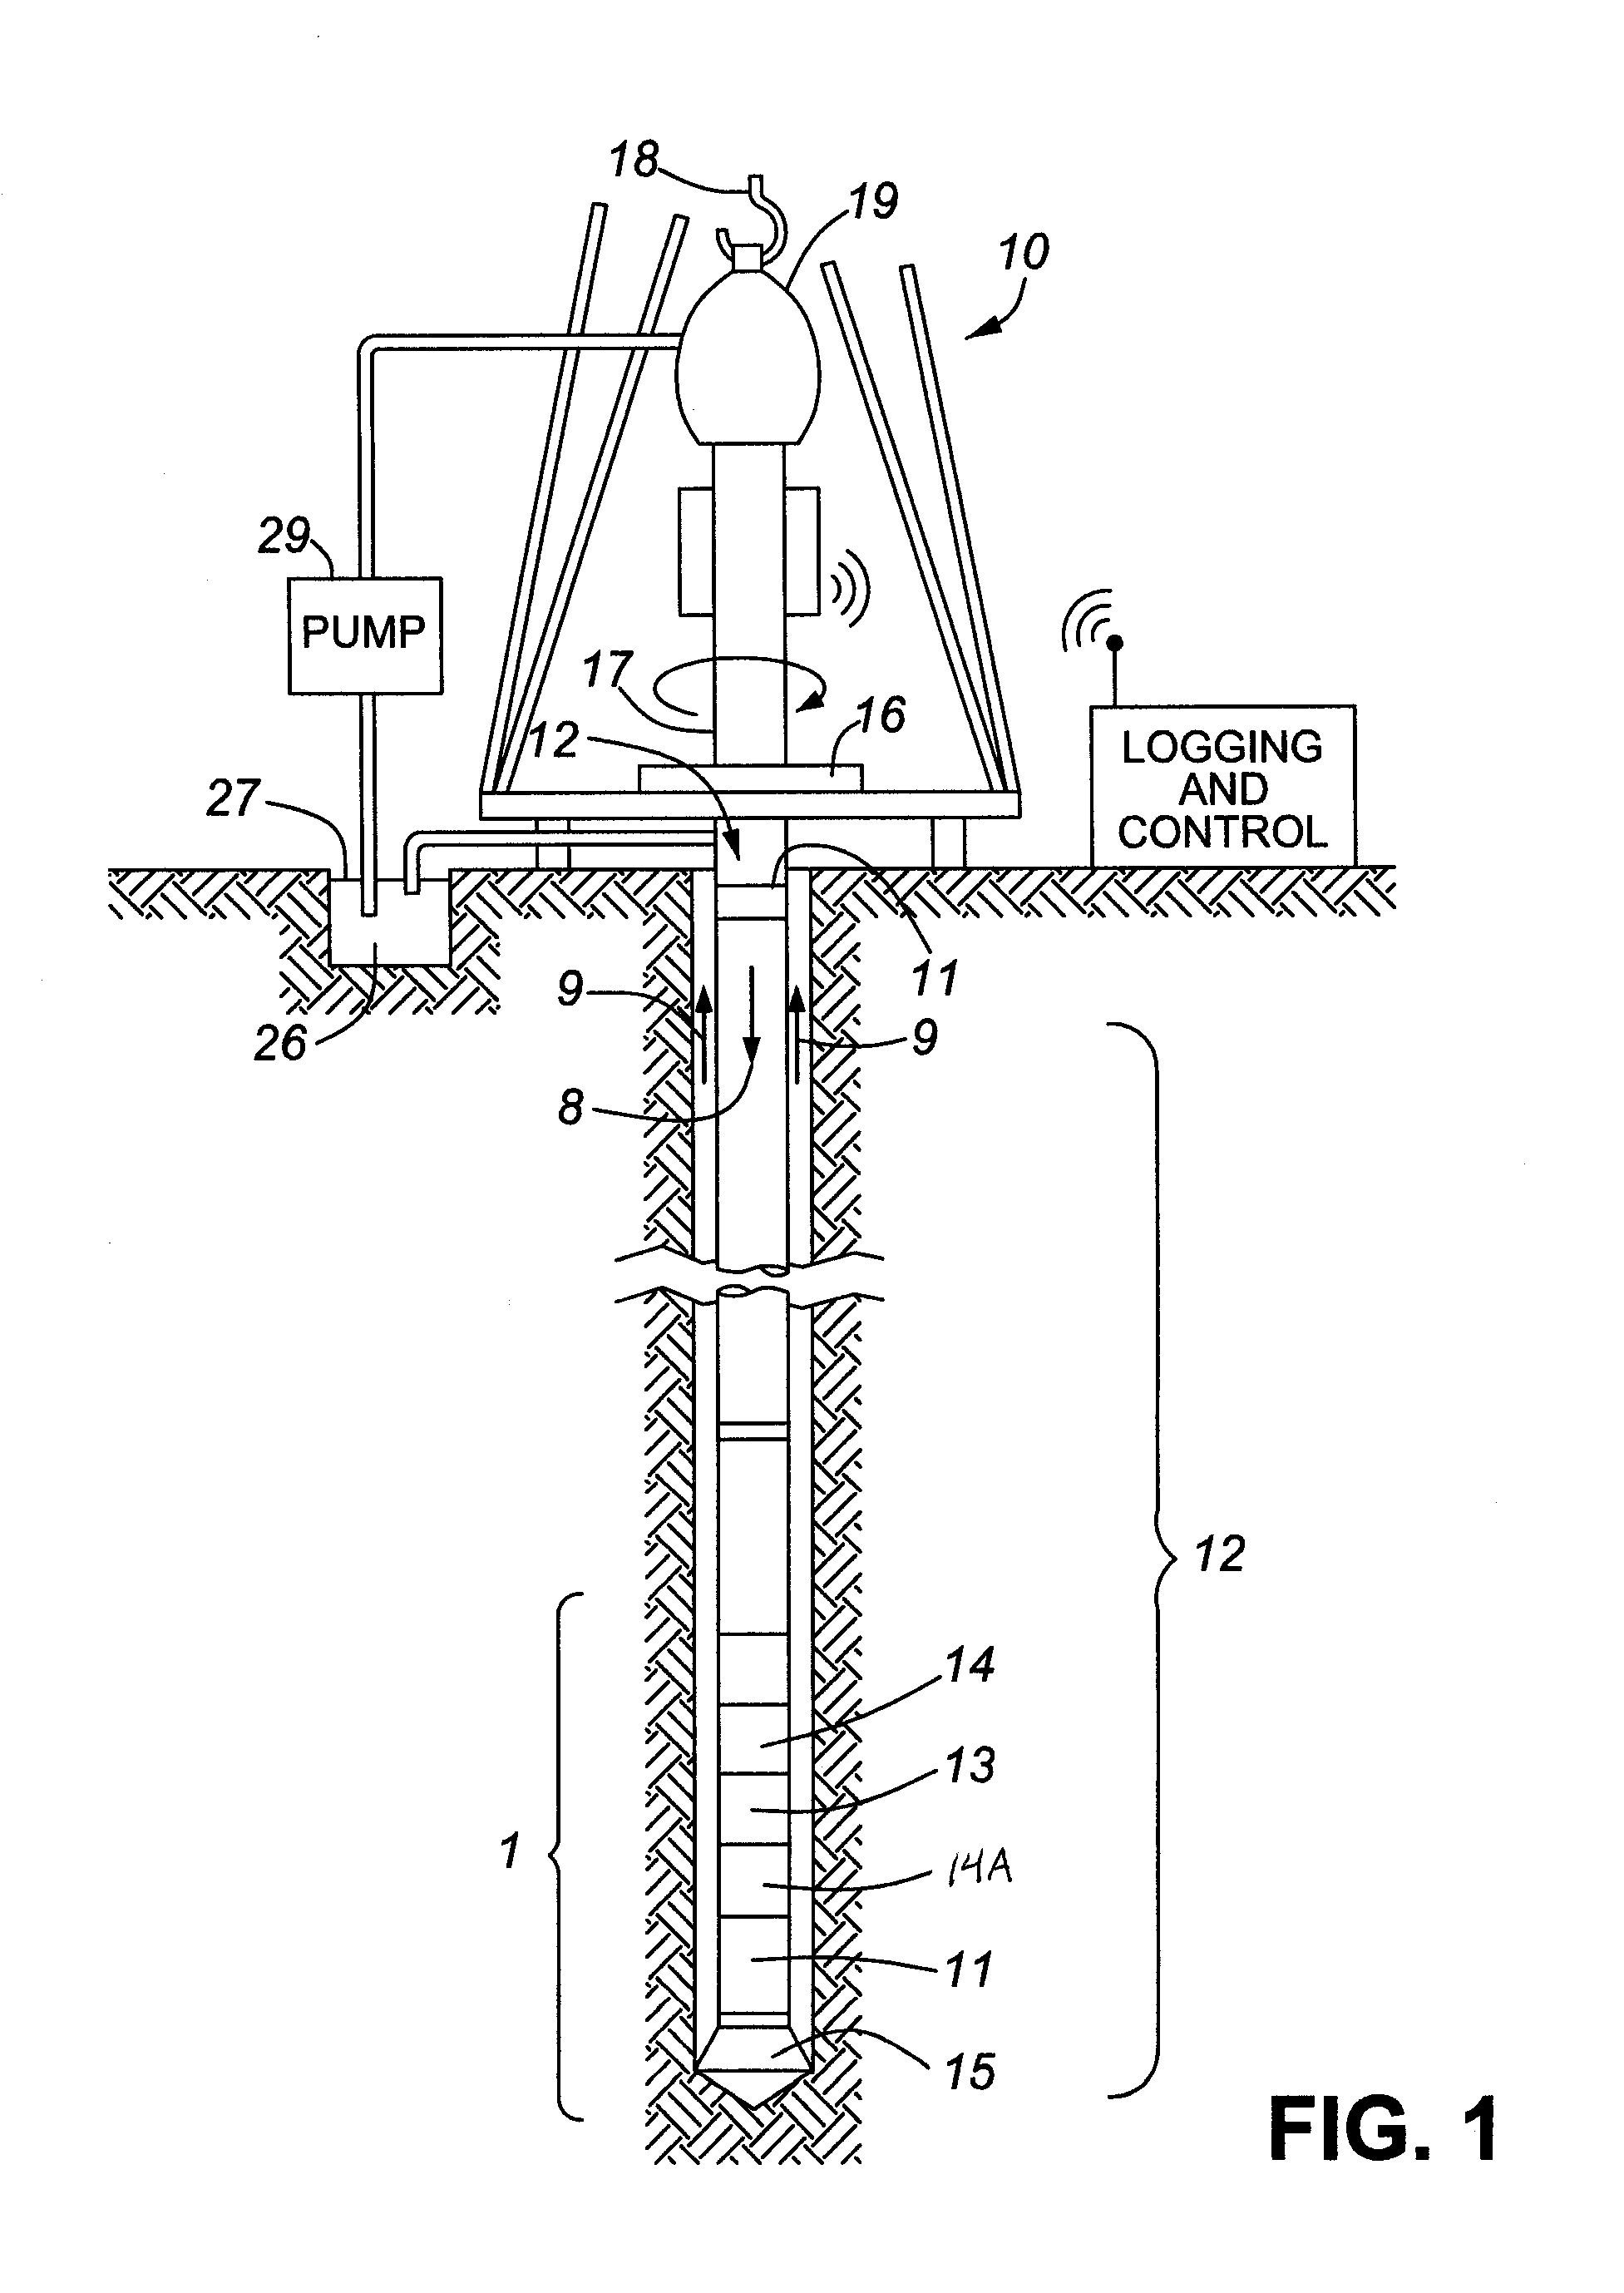 Drill bit assembly having electrically isolated gap joint for electromagnetic telemetry